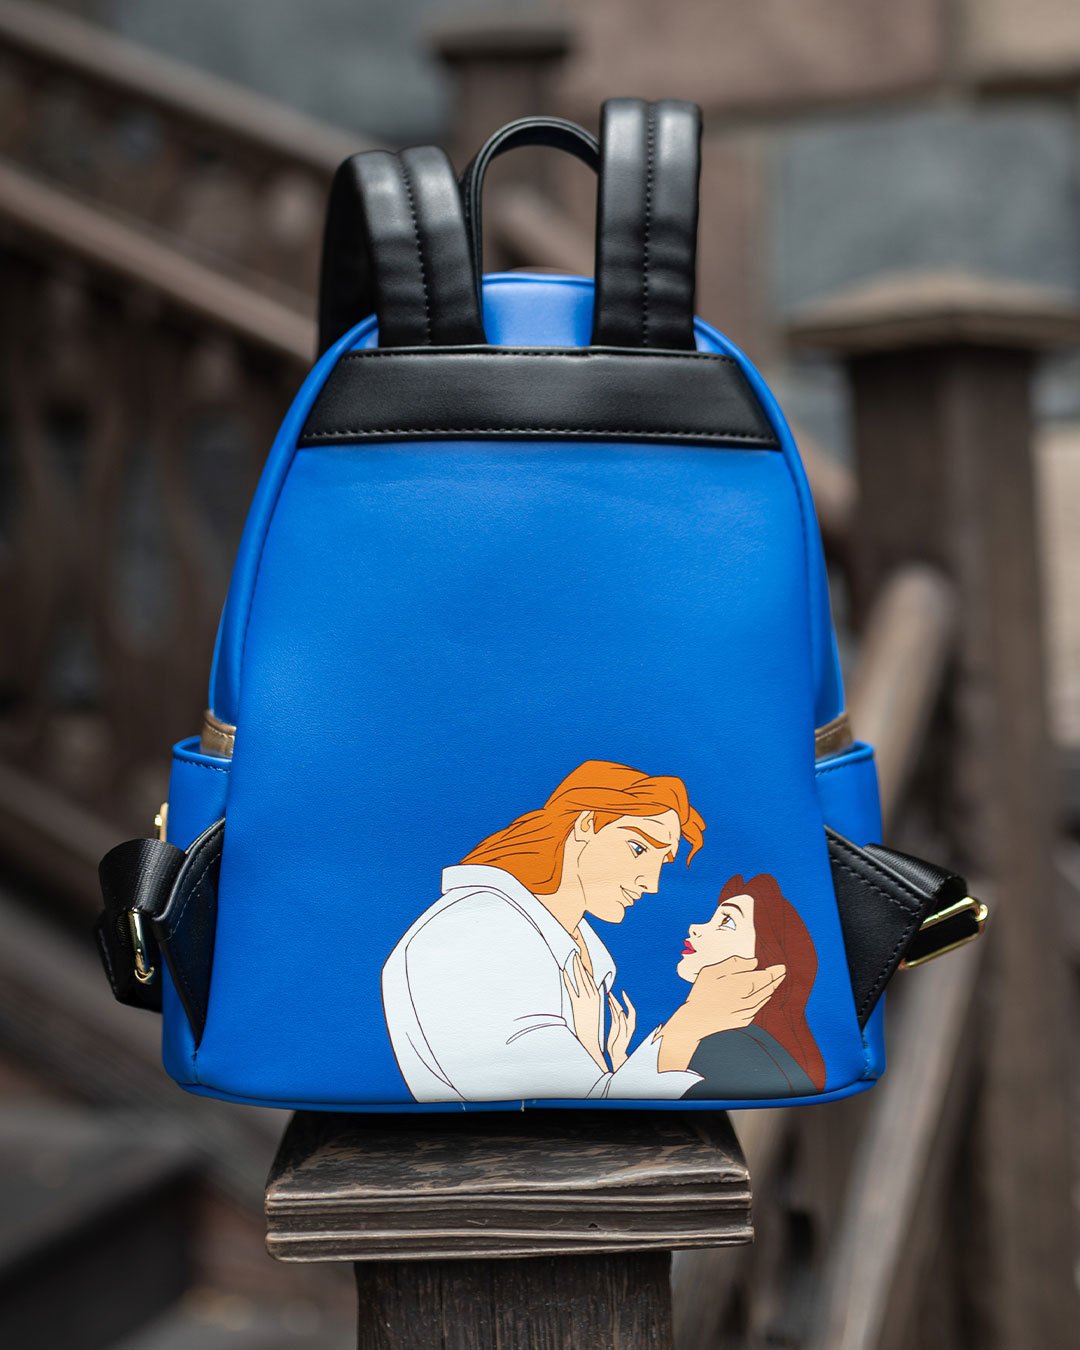 671803455566 - 707 Street Exclusive - Loungefly Disney Beauty and the Beast Prince Adam Cosplay Mini Backpack - IRL 02